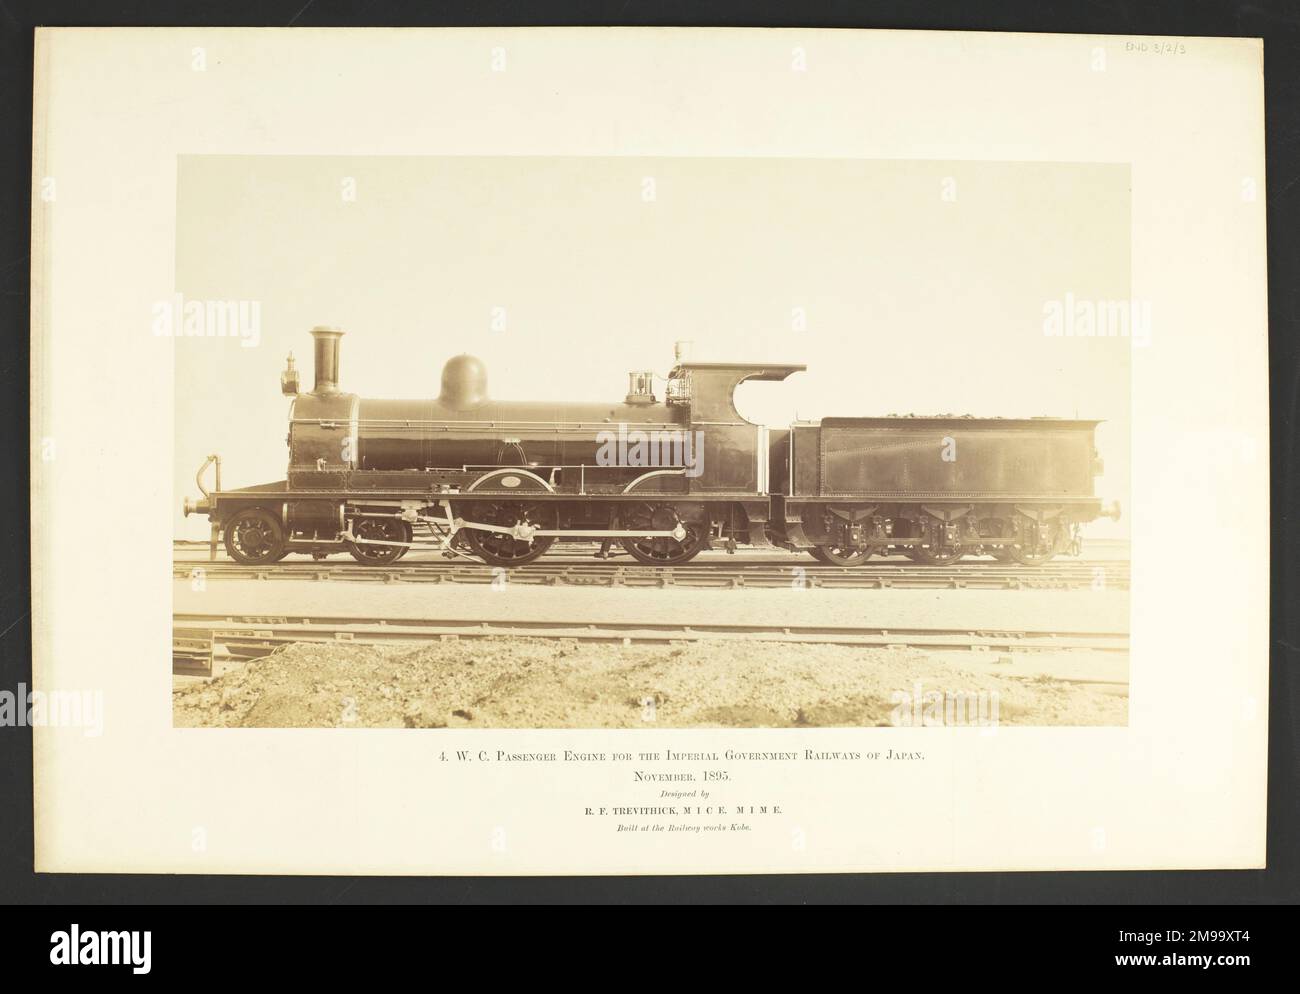 4 WC passenger engine by Richard Francis Trevithick. Side view. Stock Photo